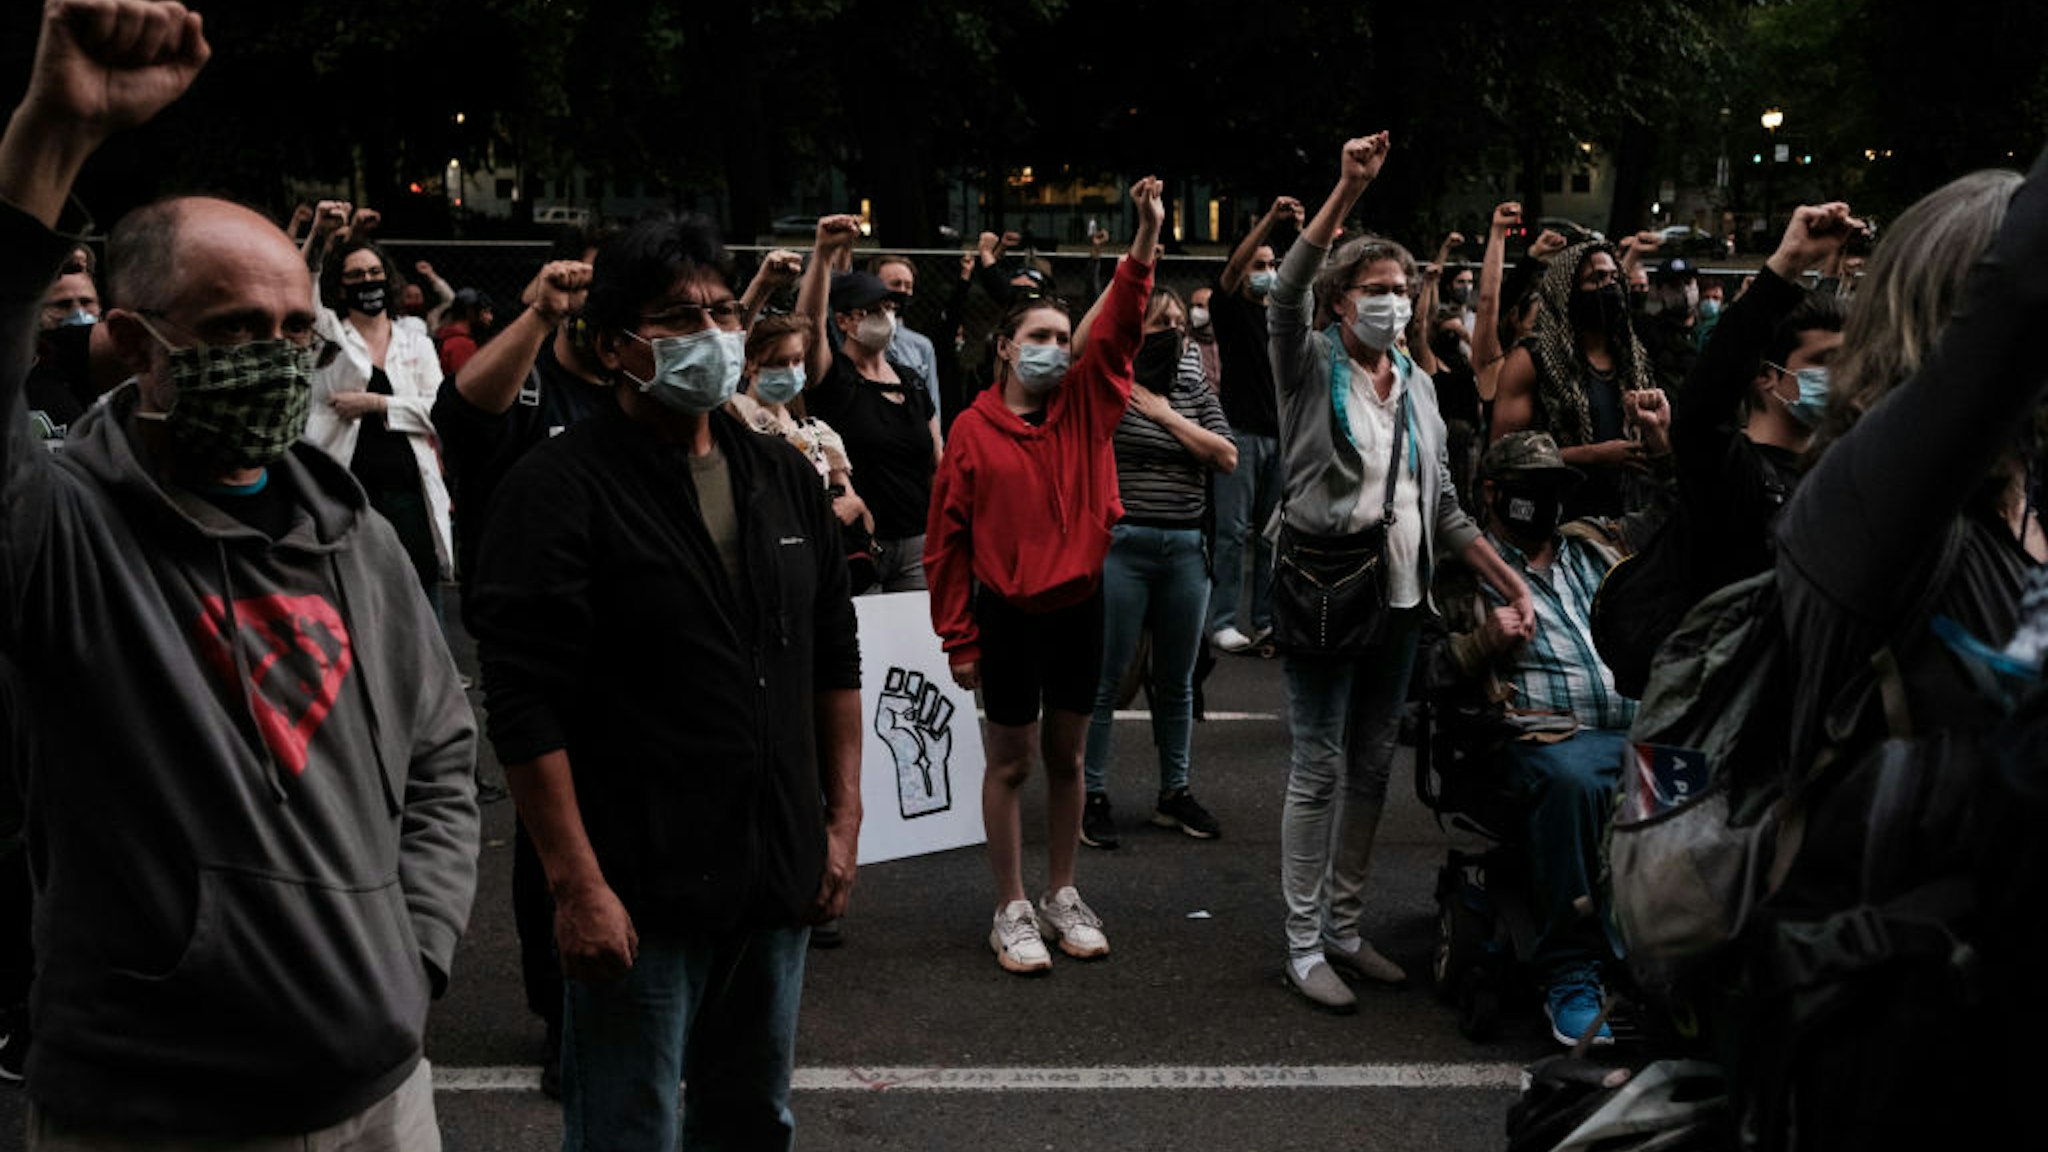 Protestors raise their hands up in solidarity after Portland Commissioner Jo Ann Hardesty speaks to the crowd Portlanders' rights to free speech and assembly at Multnomah County Justice Center on July 17, 2020 in Portland, Oregon.